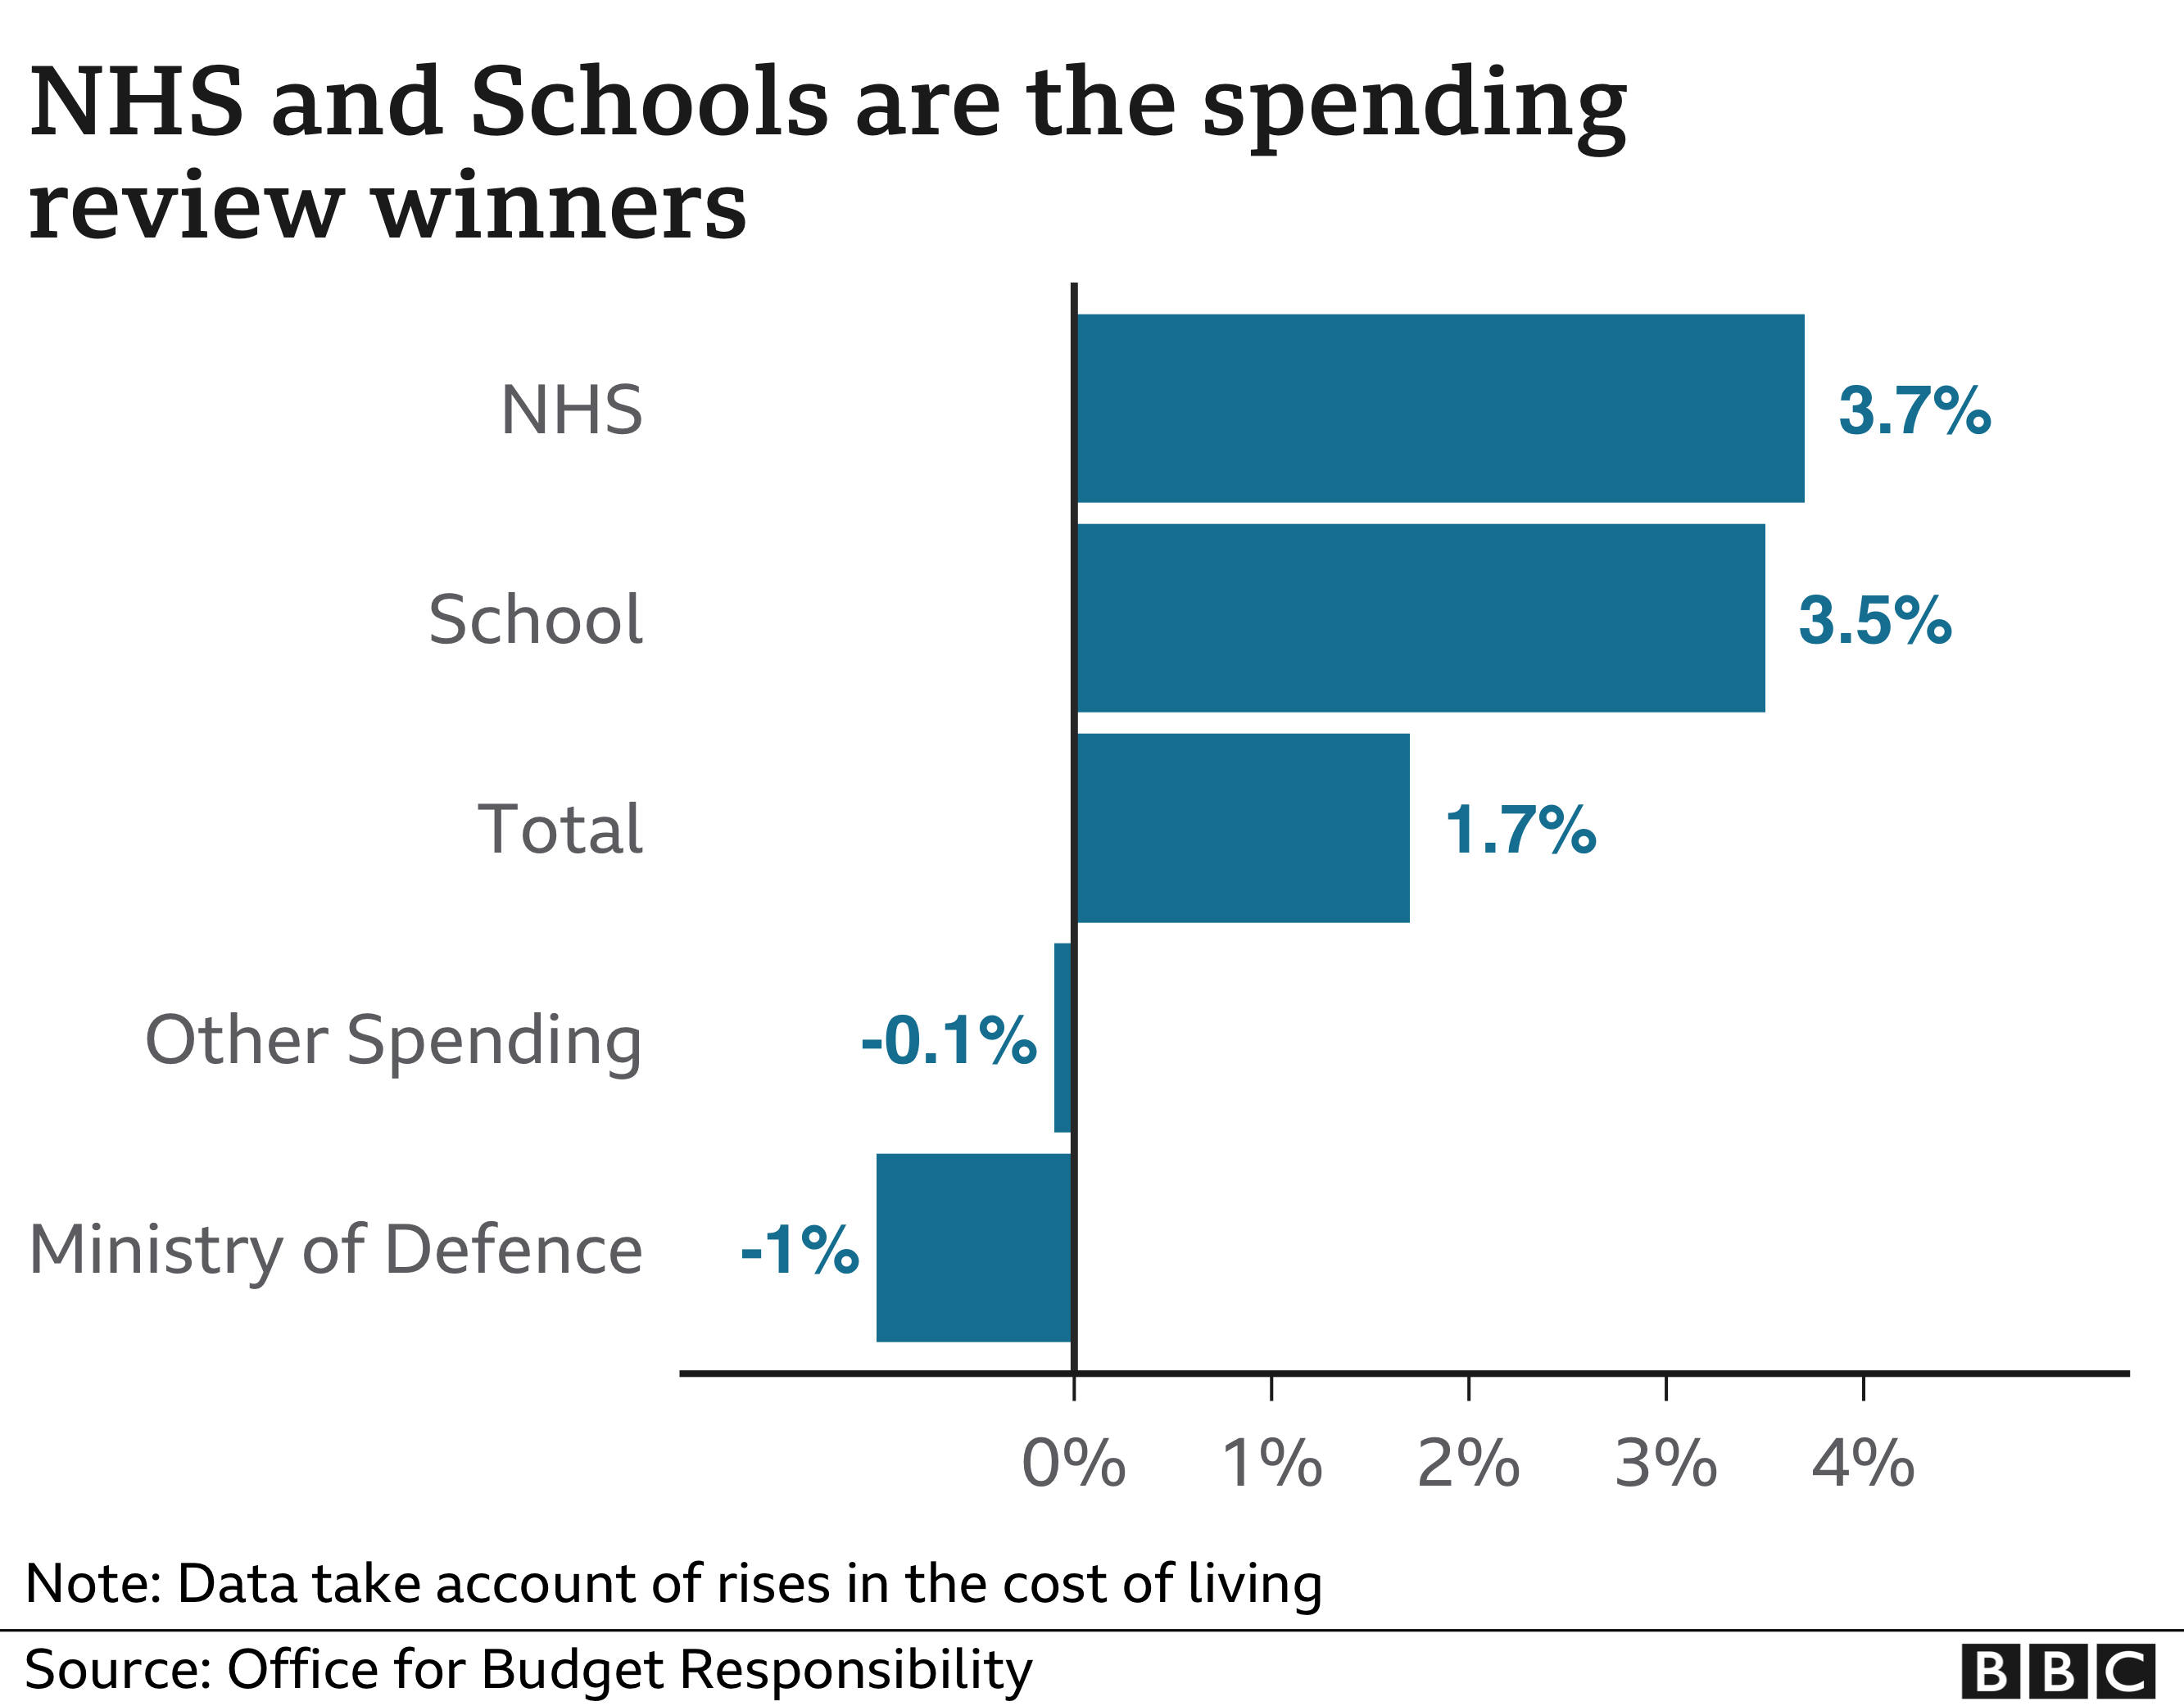 NHS and Schools are the spending review winners